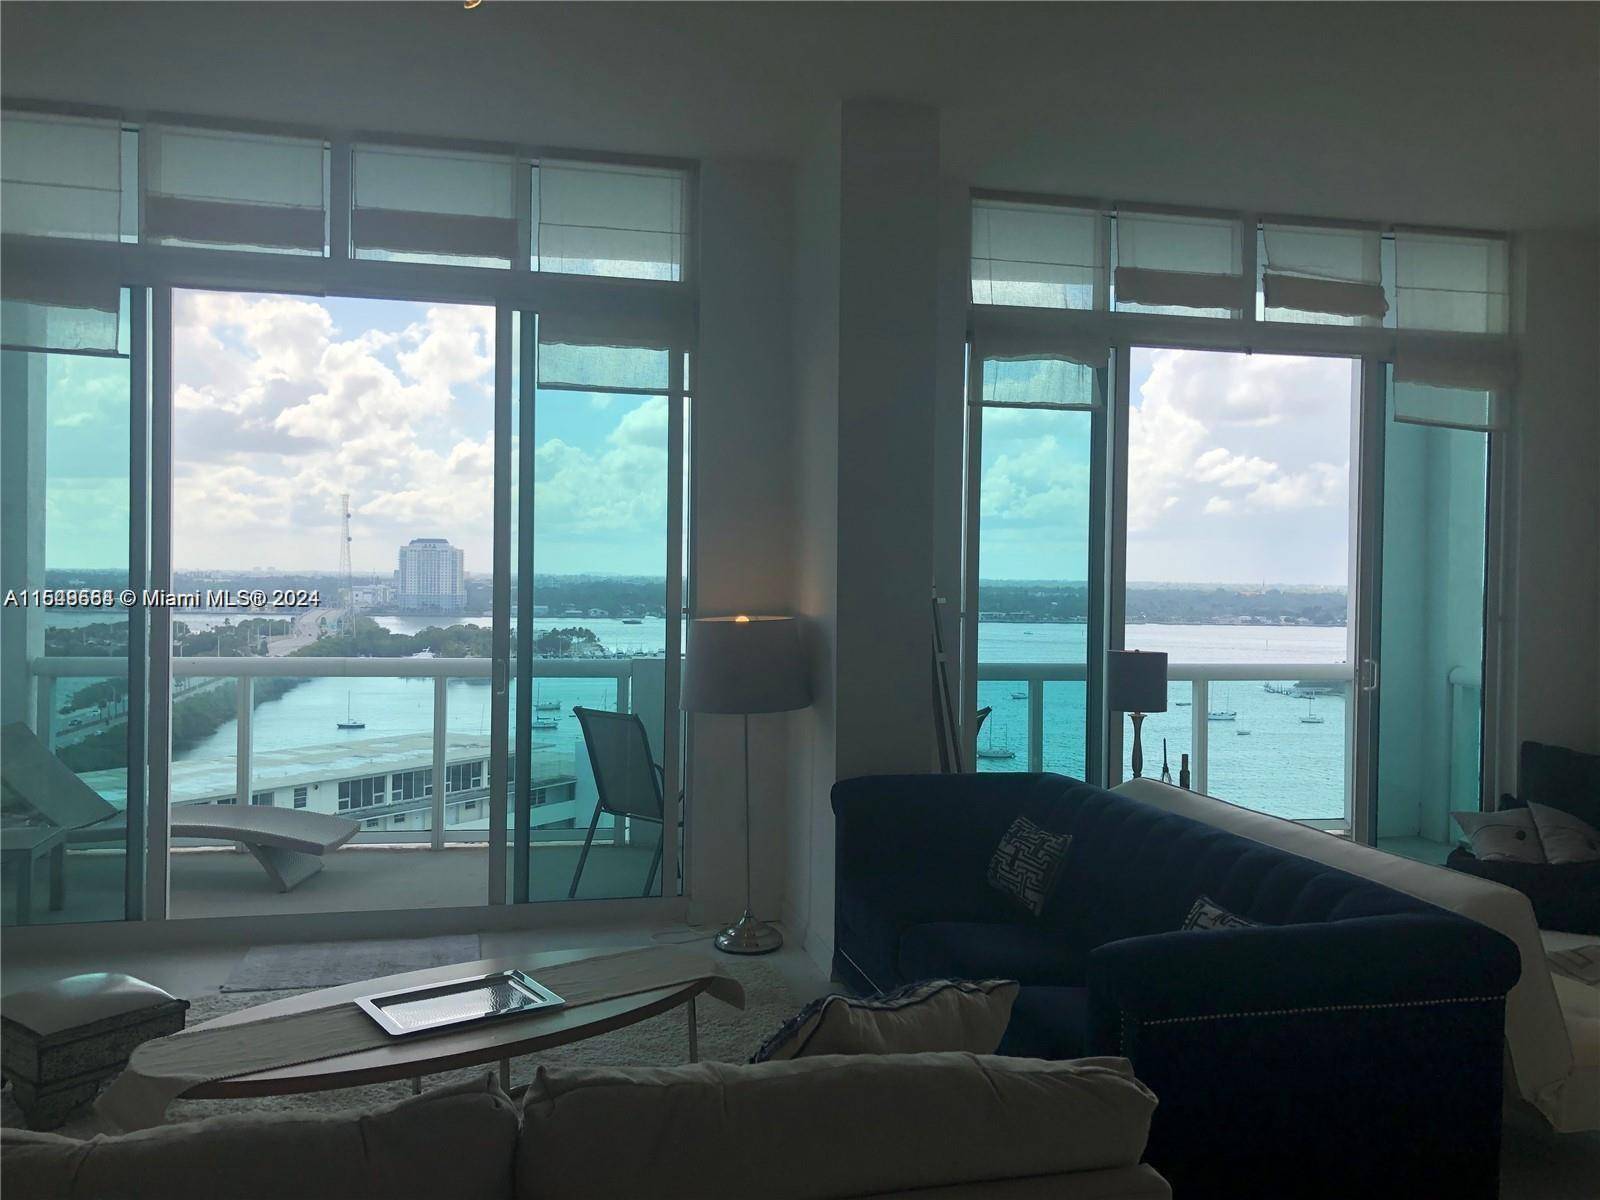 MASTERFUL DESIGN MODERN PENTHOUSE FULLY FURNISHED FULLY EQUIPPED, FACING THE BAY, EXTENDED BALCONY, PLENTY OF NATURAL LIGHT, HIGH CEILINGS, WHITE CONCRETE FLOOR FINISH, STAINLESS STEEL APPLIANCES, 2 BEDROOMS 2 BATHROOMS ...